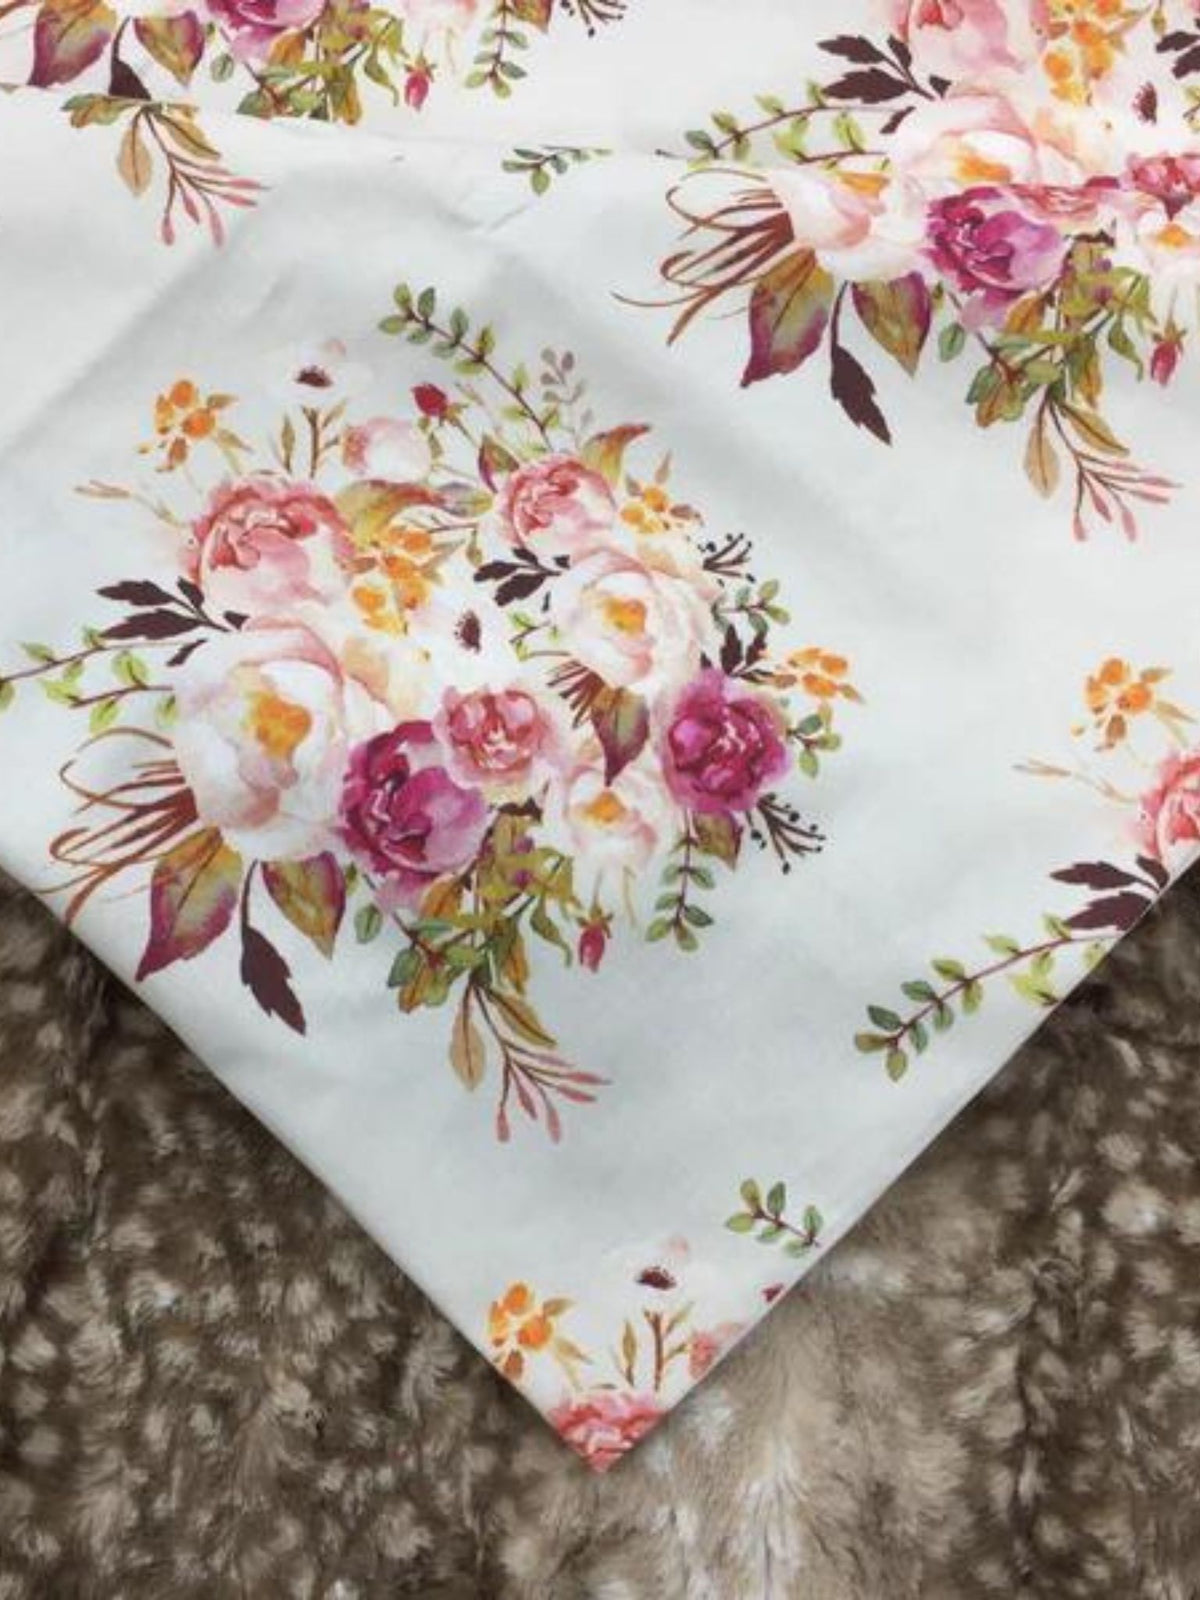 Standard blanket- Antique Floral and Fawn Minky Blanket - DBC Baby Bedding Co 